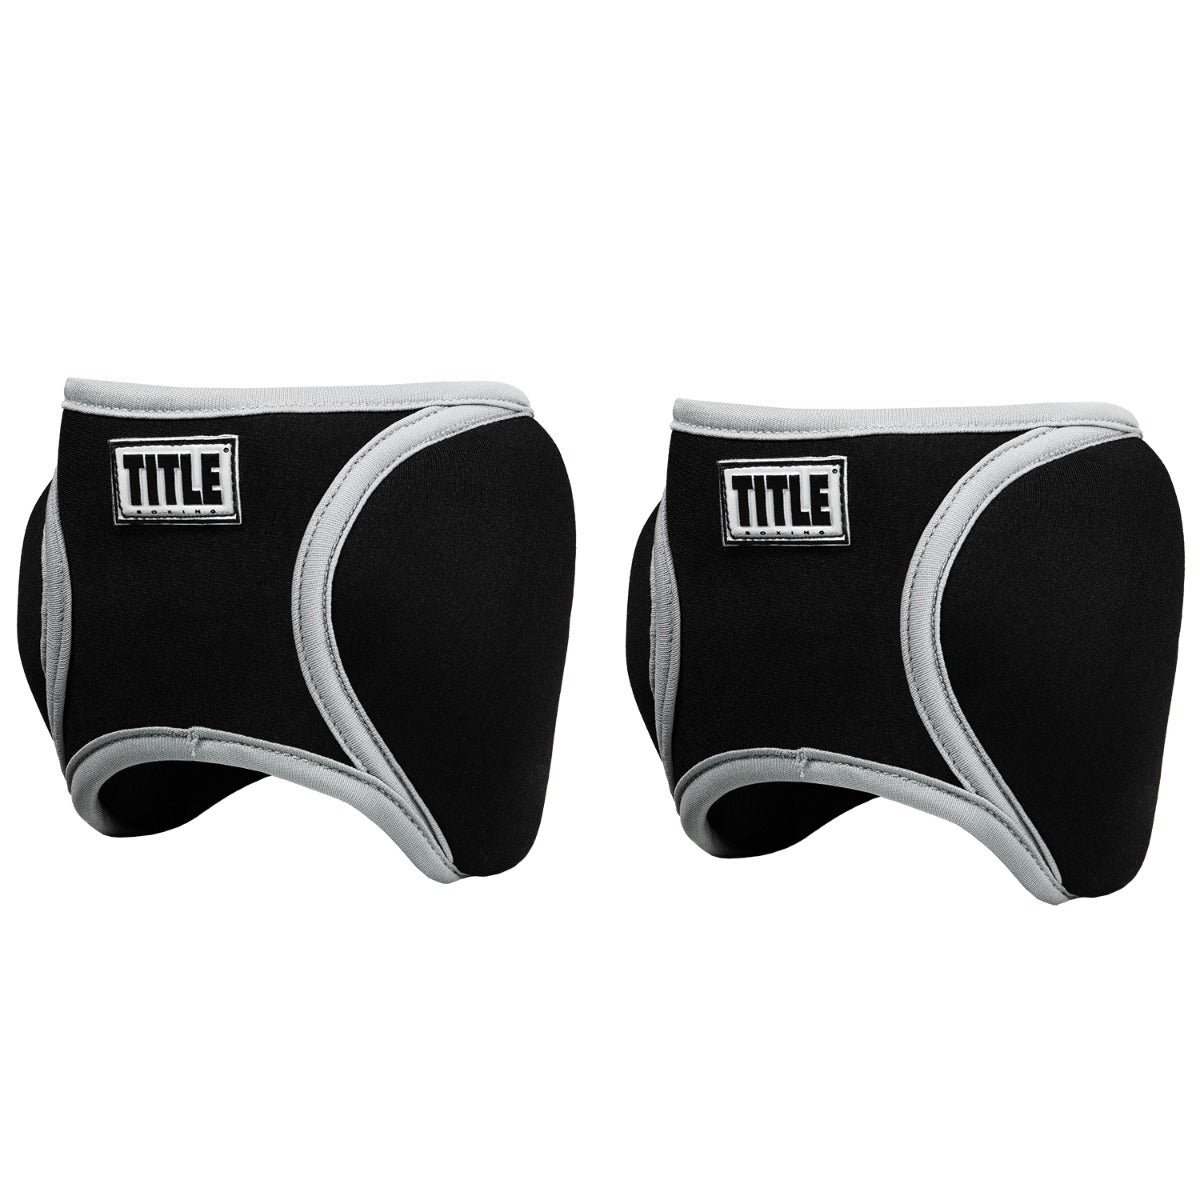 TITLE Pro Ankle Weights